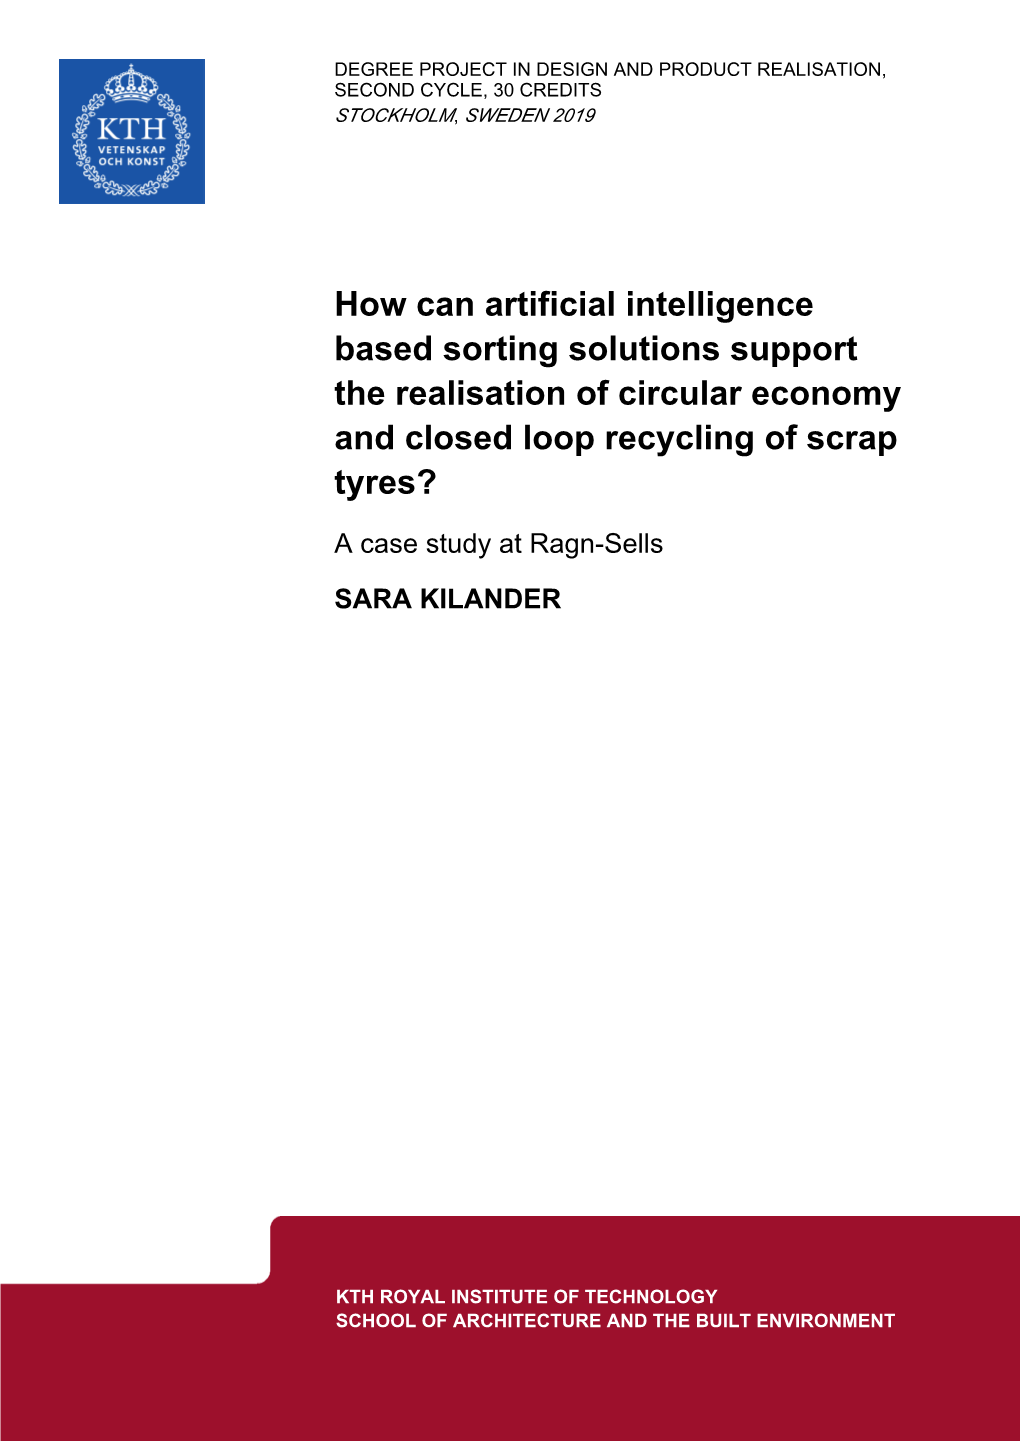 How Can Artificial Intelligence Based Sorting Solutions Support the Realisation of Circular Economy and Closed Loop Recycling of Scrap Tyres?